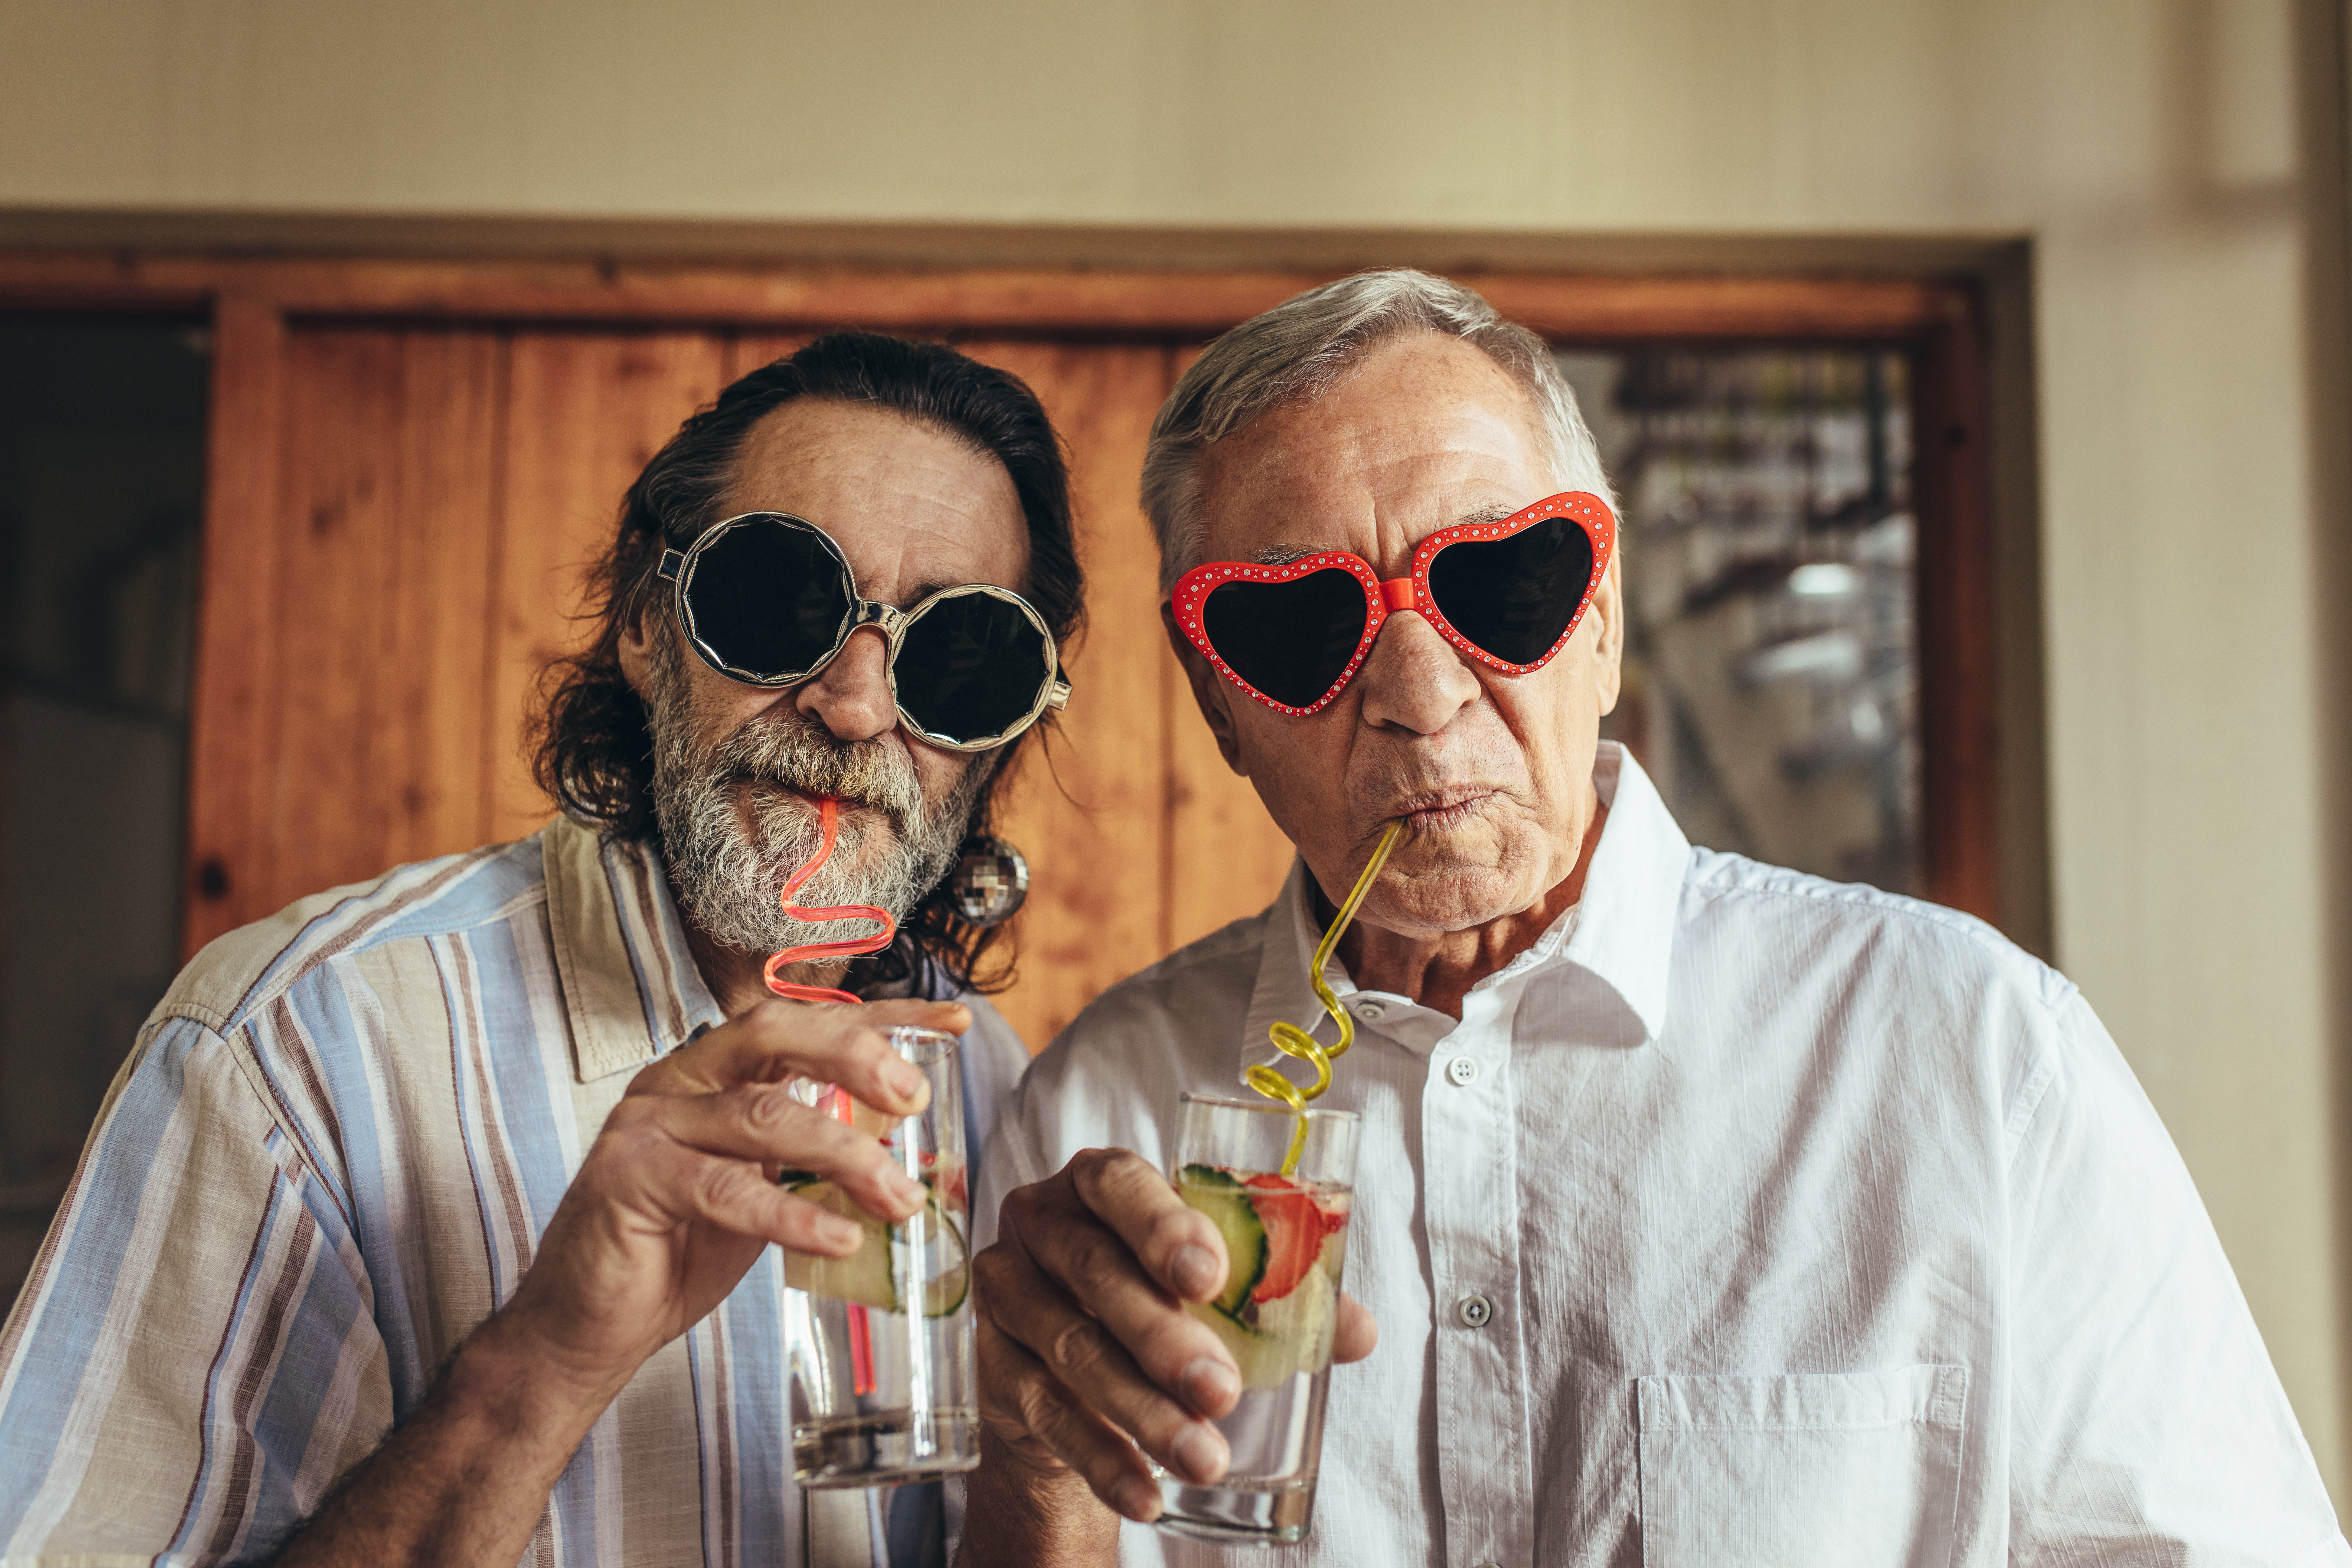 Two retired men wearing funny sunglasses